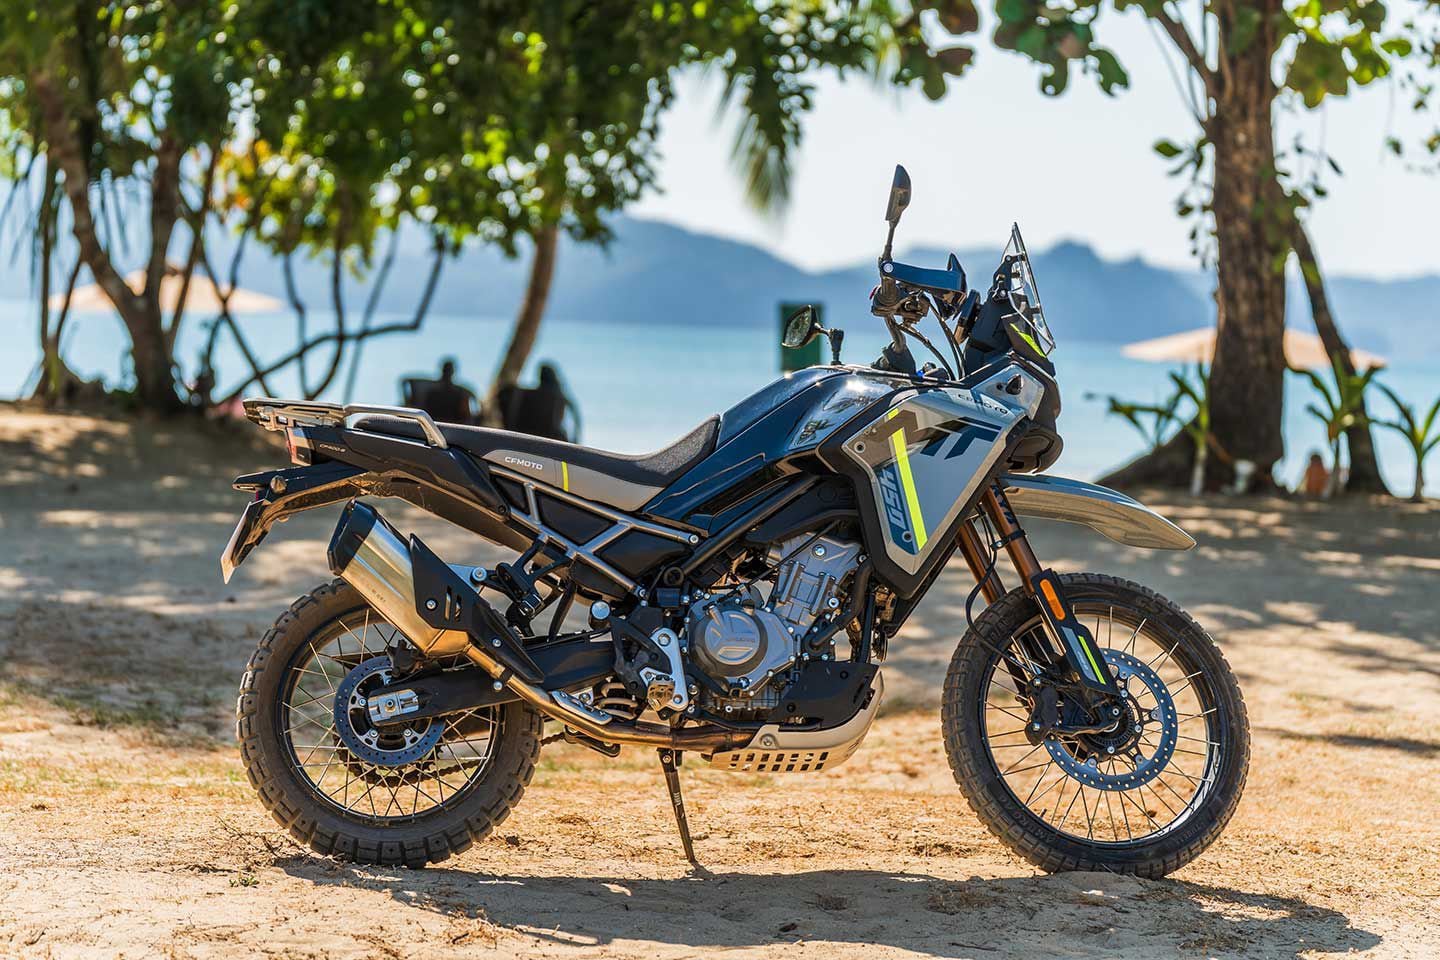 Ibex 450 in Tundra Gray. Note: The Ibex 450 is known as the 450MT in other parts of the world. Ibex (the name used for CFMoto’s entire adventure lineup) was enlisted to ensure no overlap with Yamaha’s MT lineup in the States. US models will also come with the low front fender.